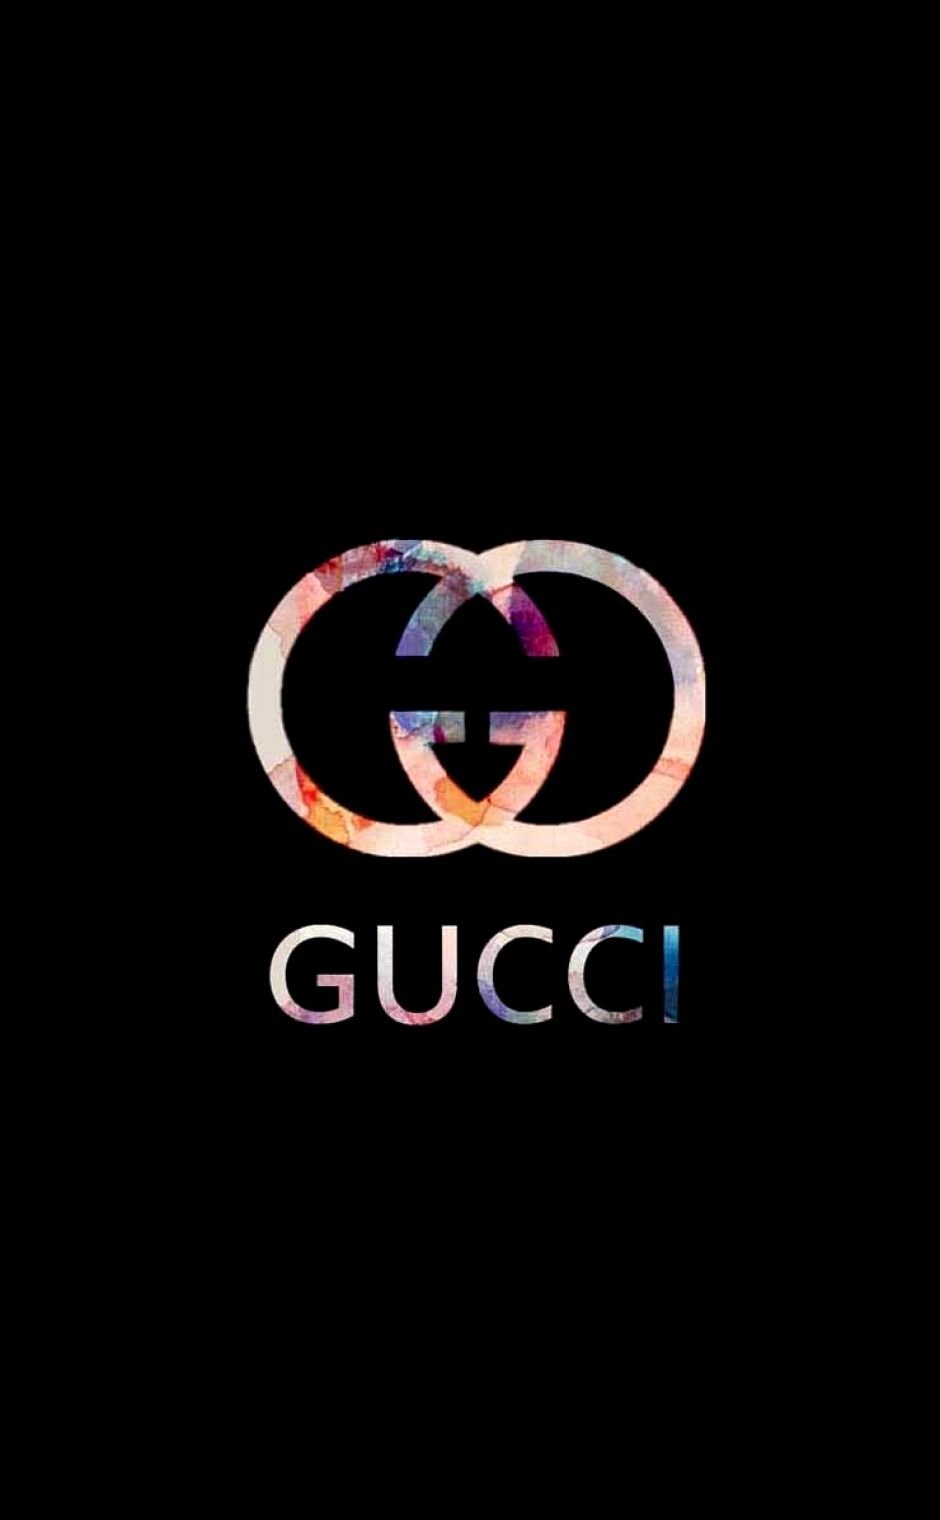 Gucci Apple Logo Wallpapers